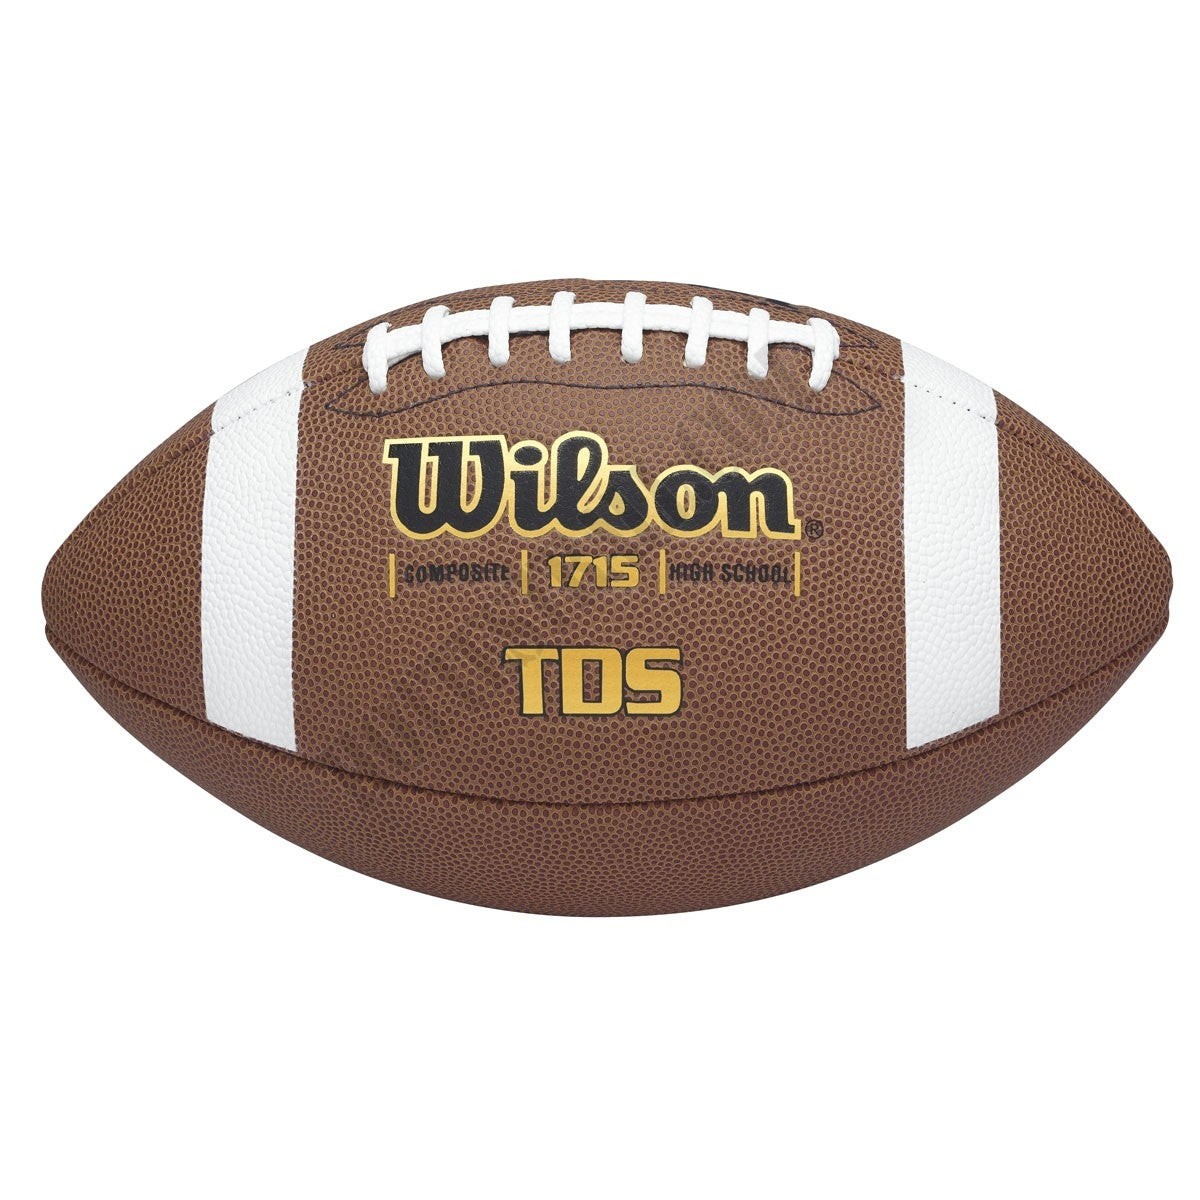 TDS Composite Football - Official Size - Wilson Discount Store - TDS Composite Football - Official Size - Wilson Discount Store